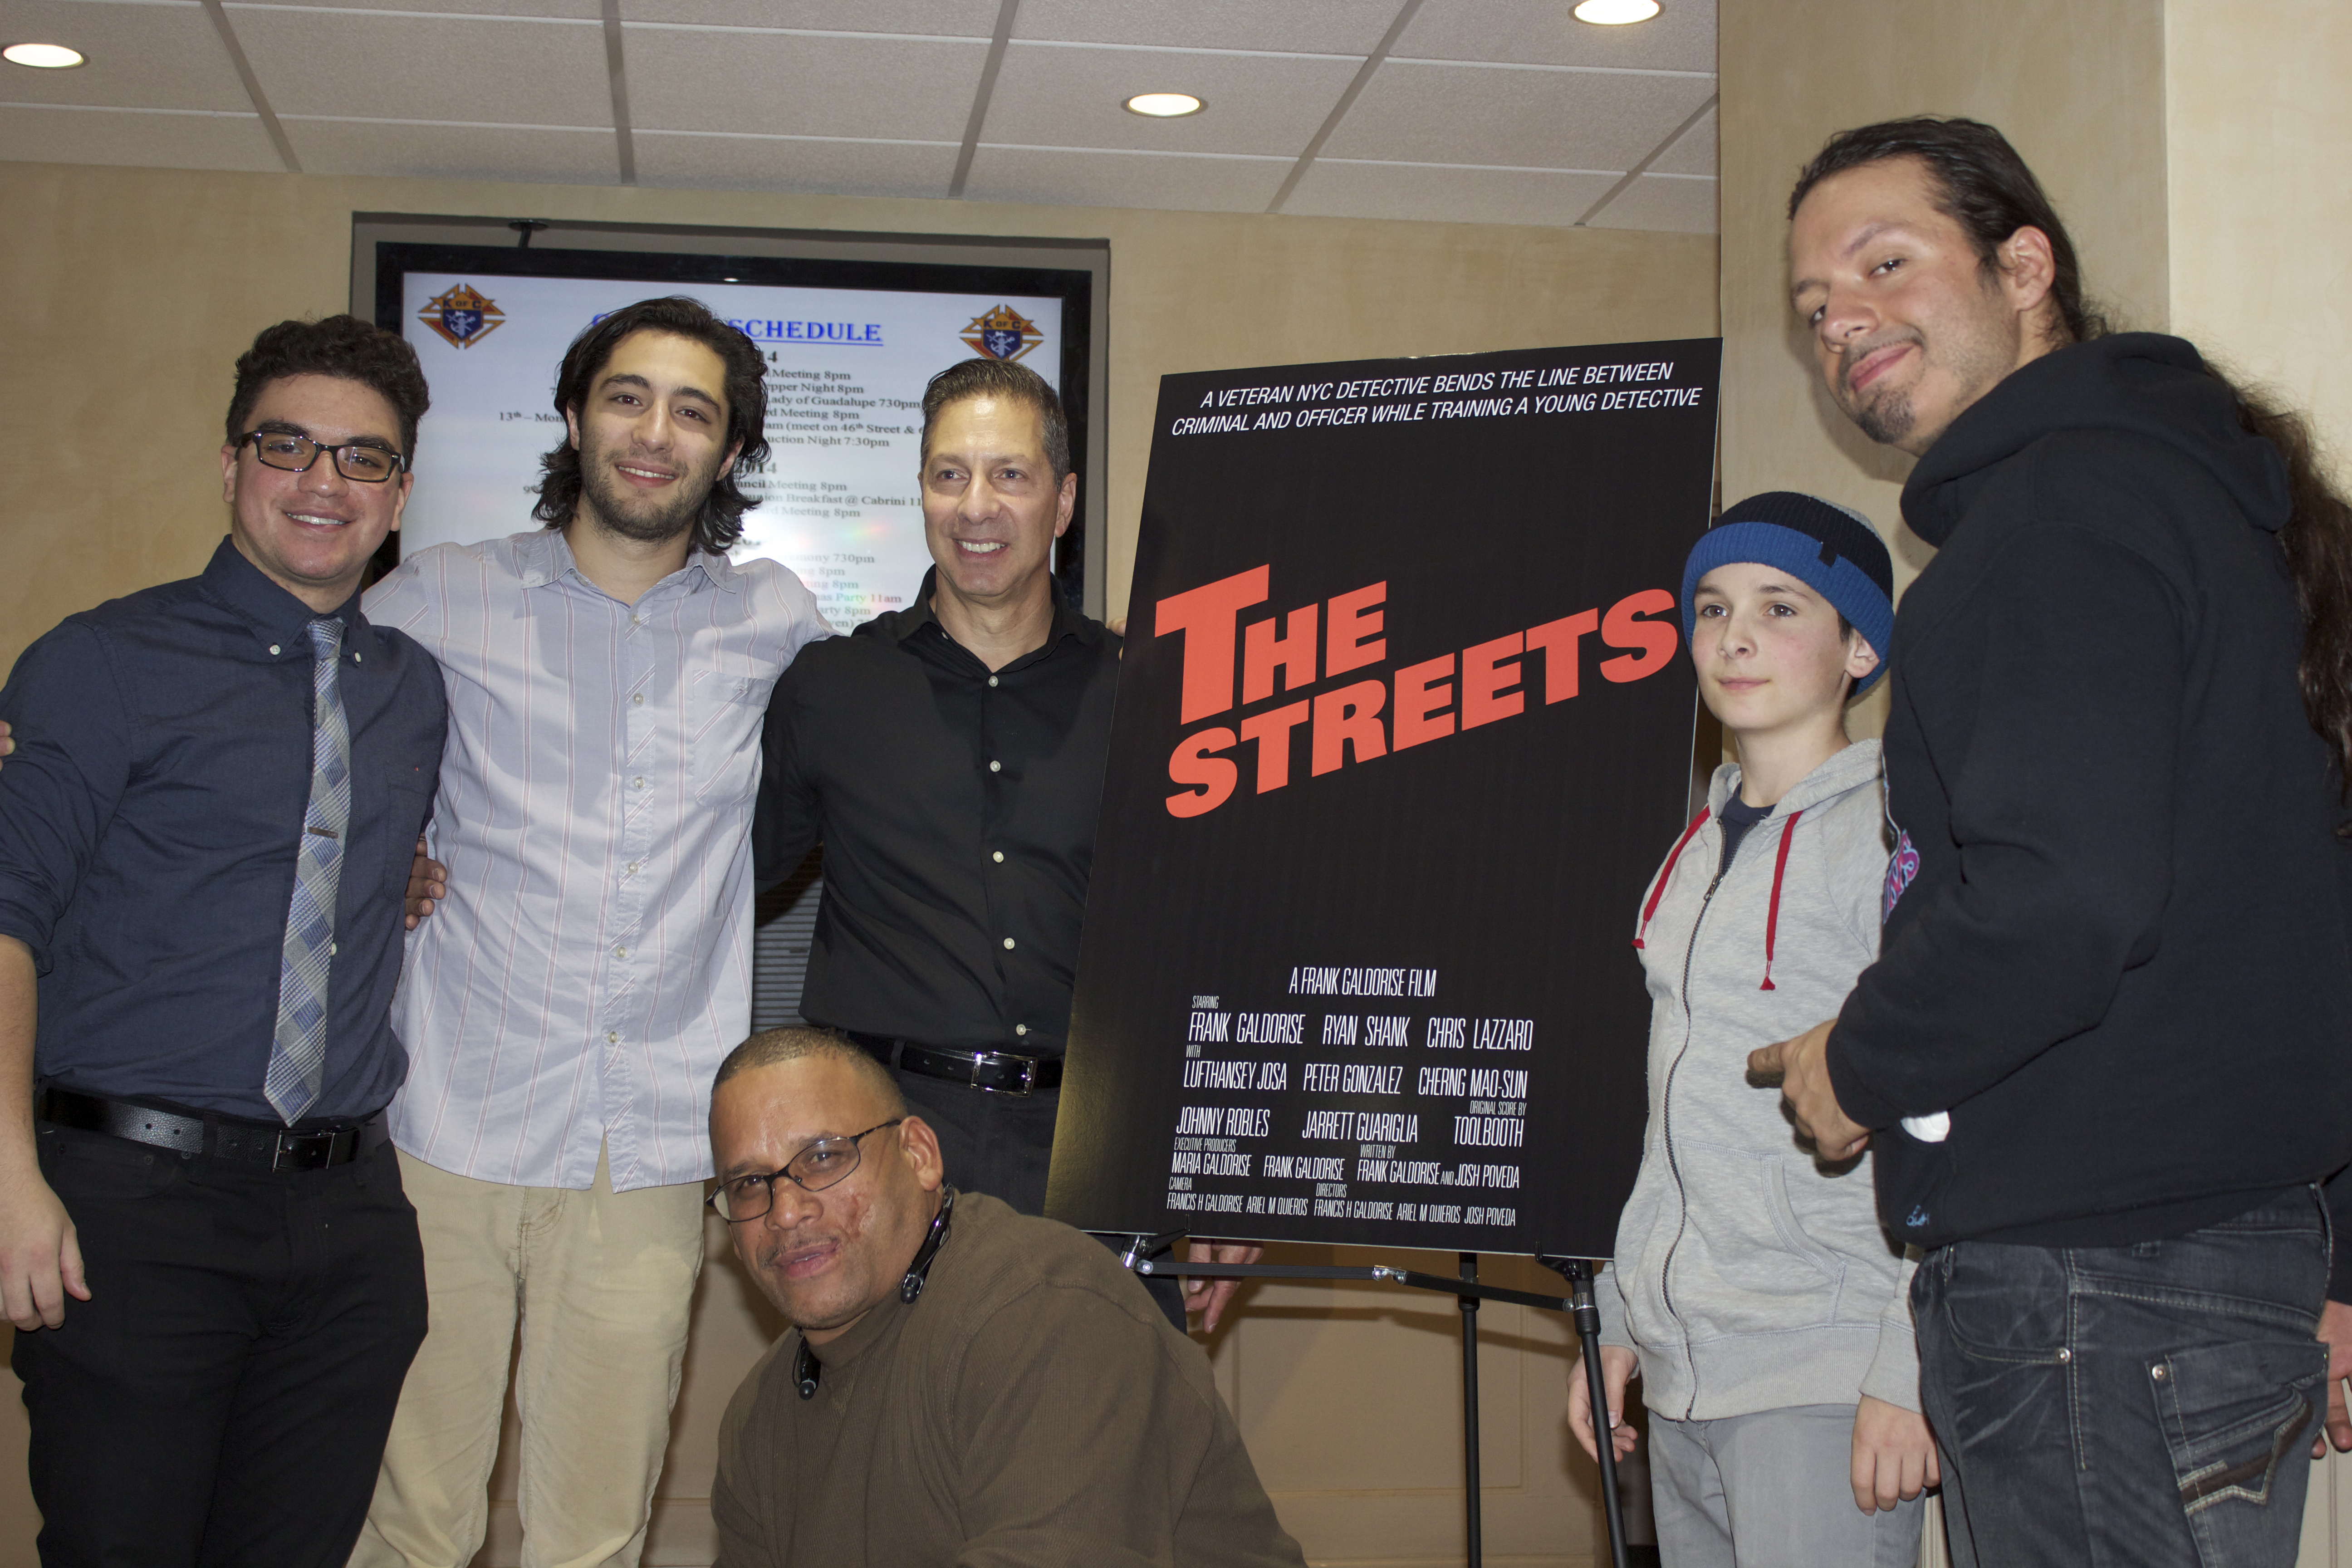 THE STREETS Cast Party